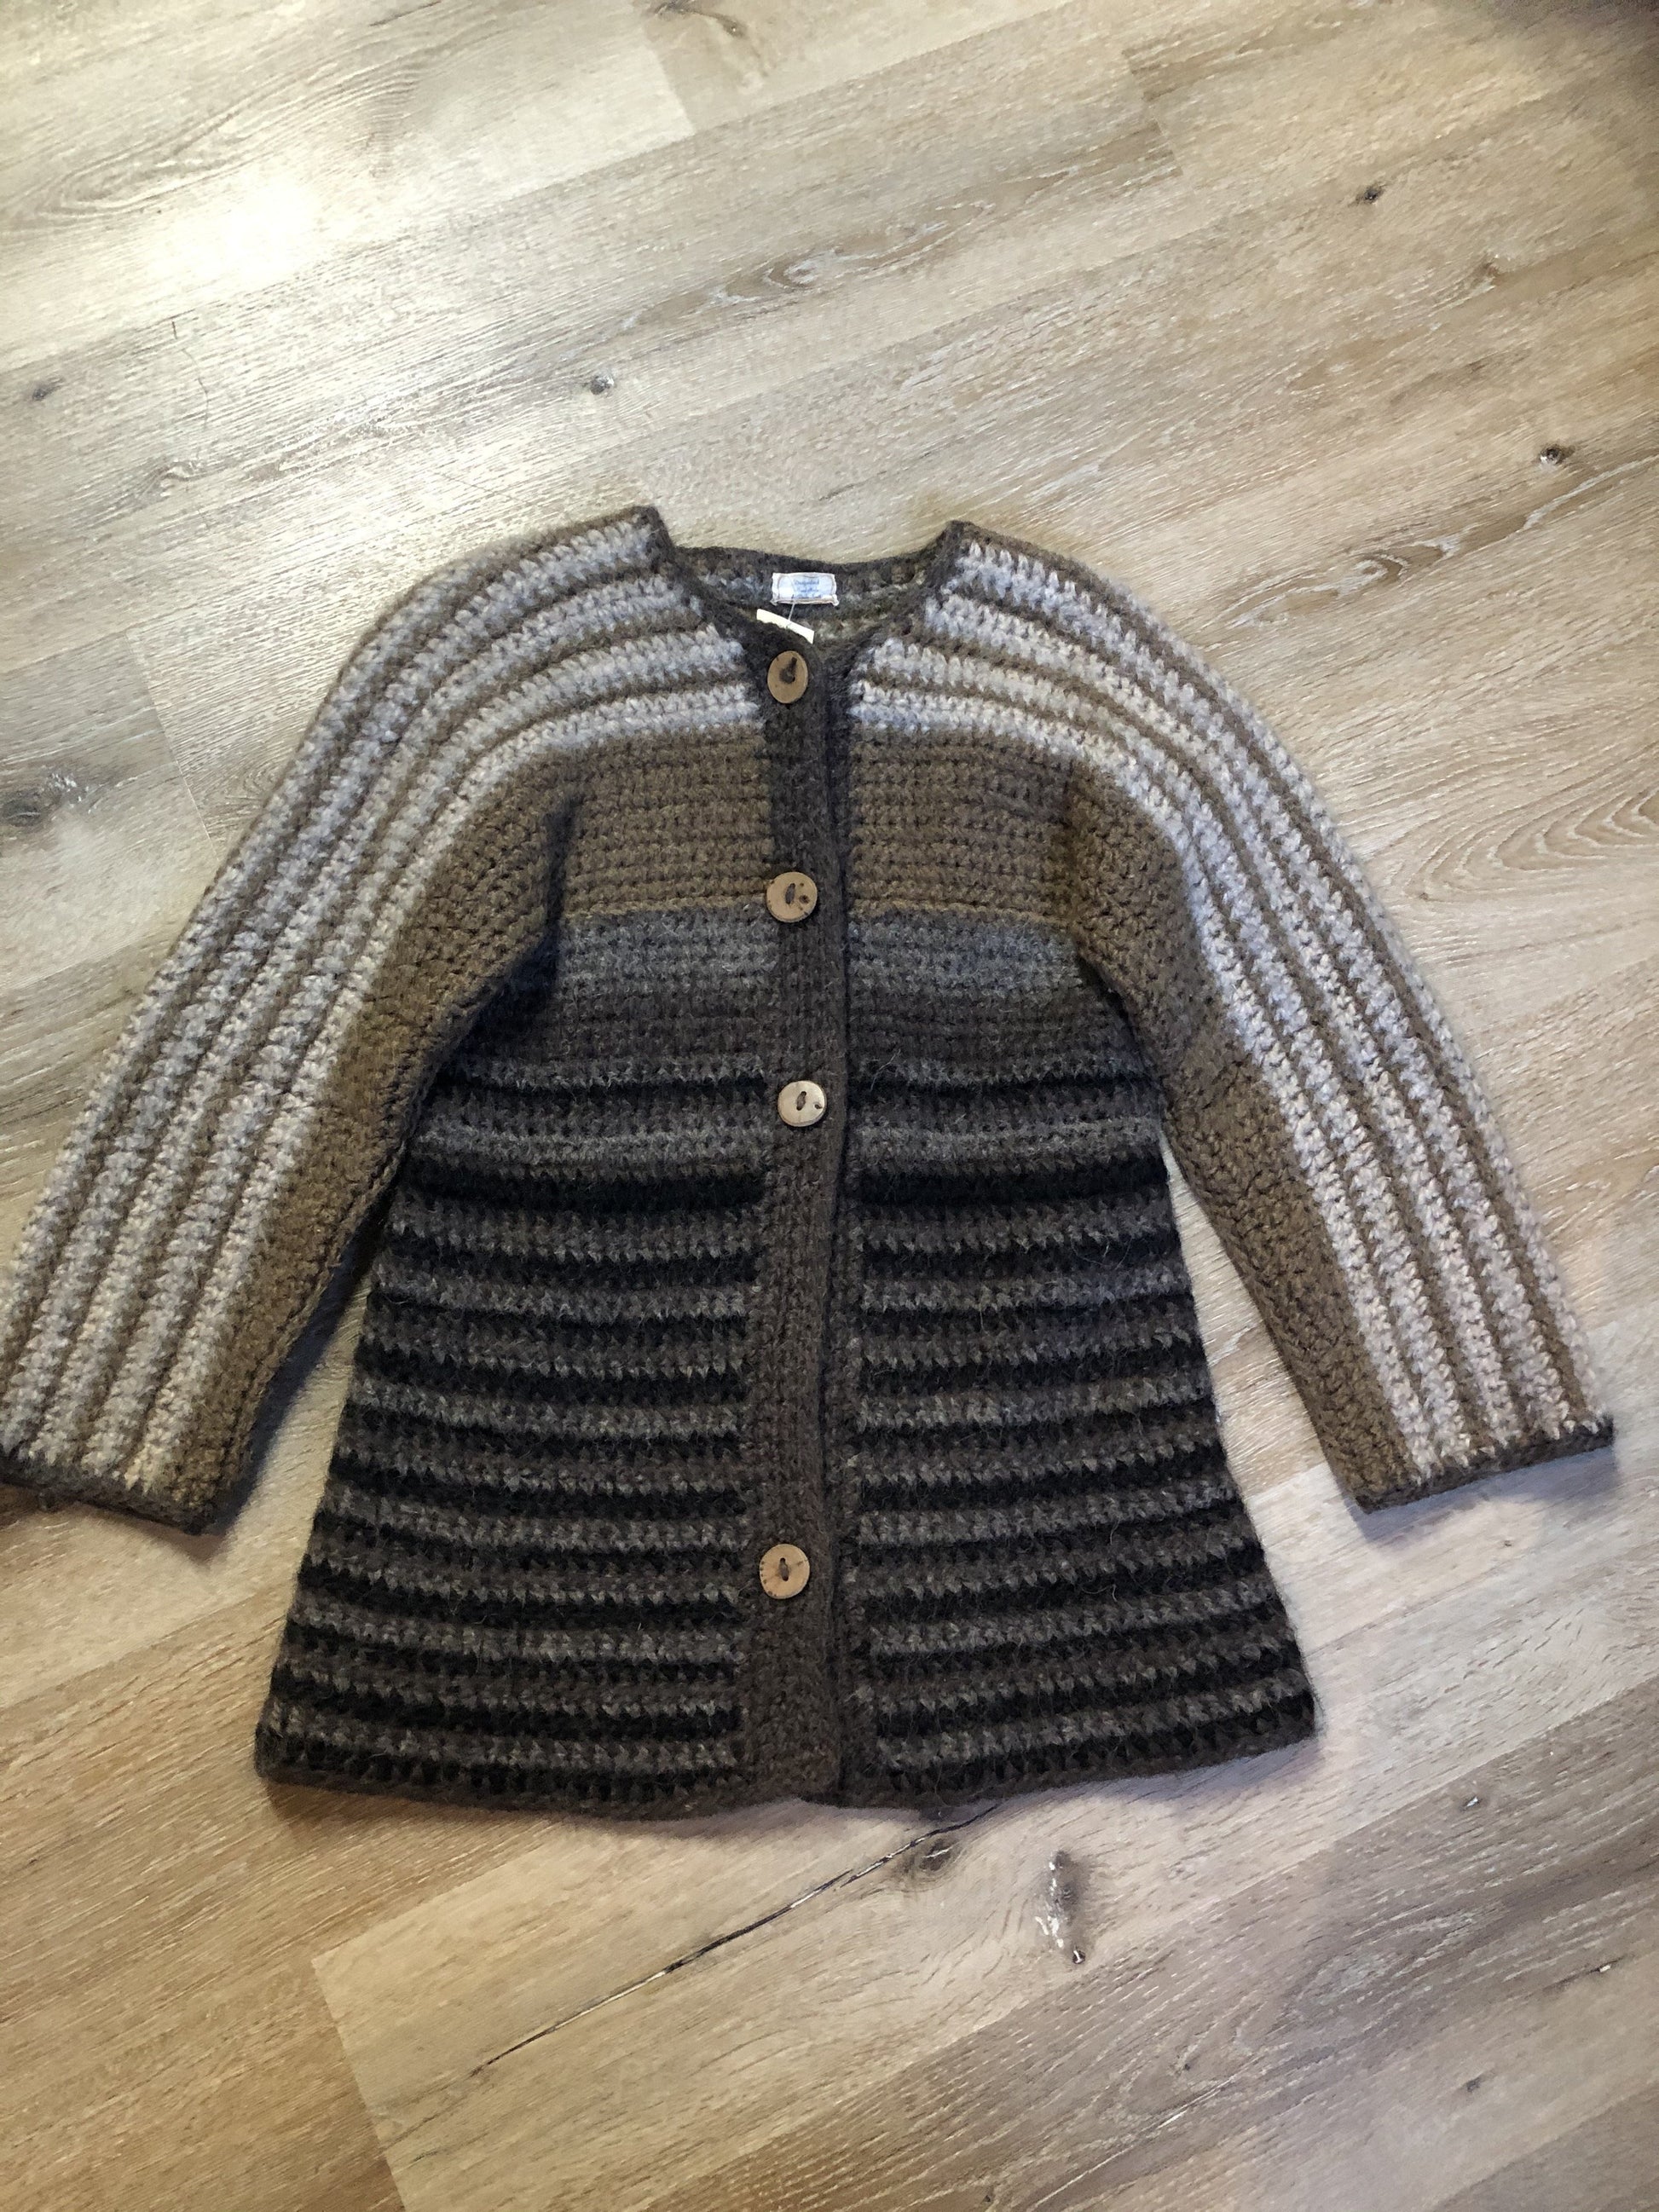 Kingspier Vintage - Paula Scott hand knit wool cardigan in a gradient pattern of beige to dark brown. This cardigan features wooden buttons and was handmade in Nova Scotia. Size medium/ large.